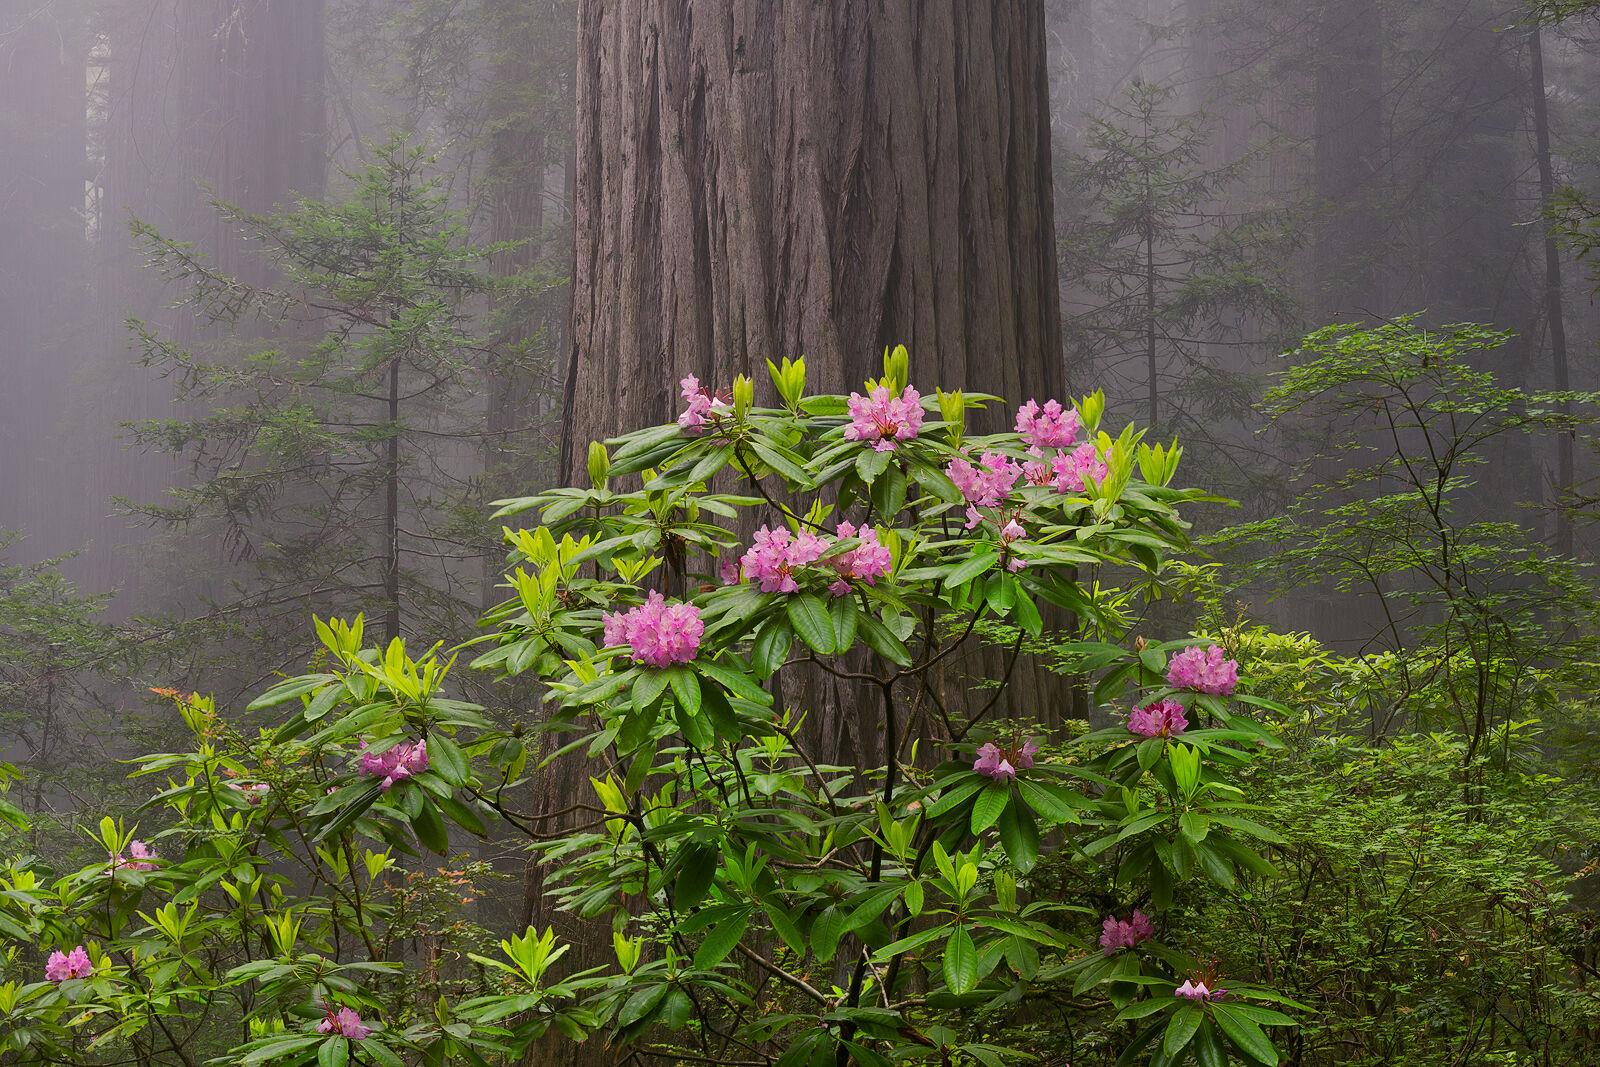 Very large redwood tree trunk is centered with pink rhododendron flowers in front and a foggy forest background. 